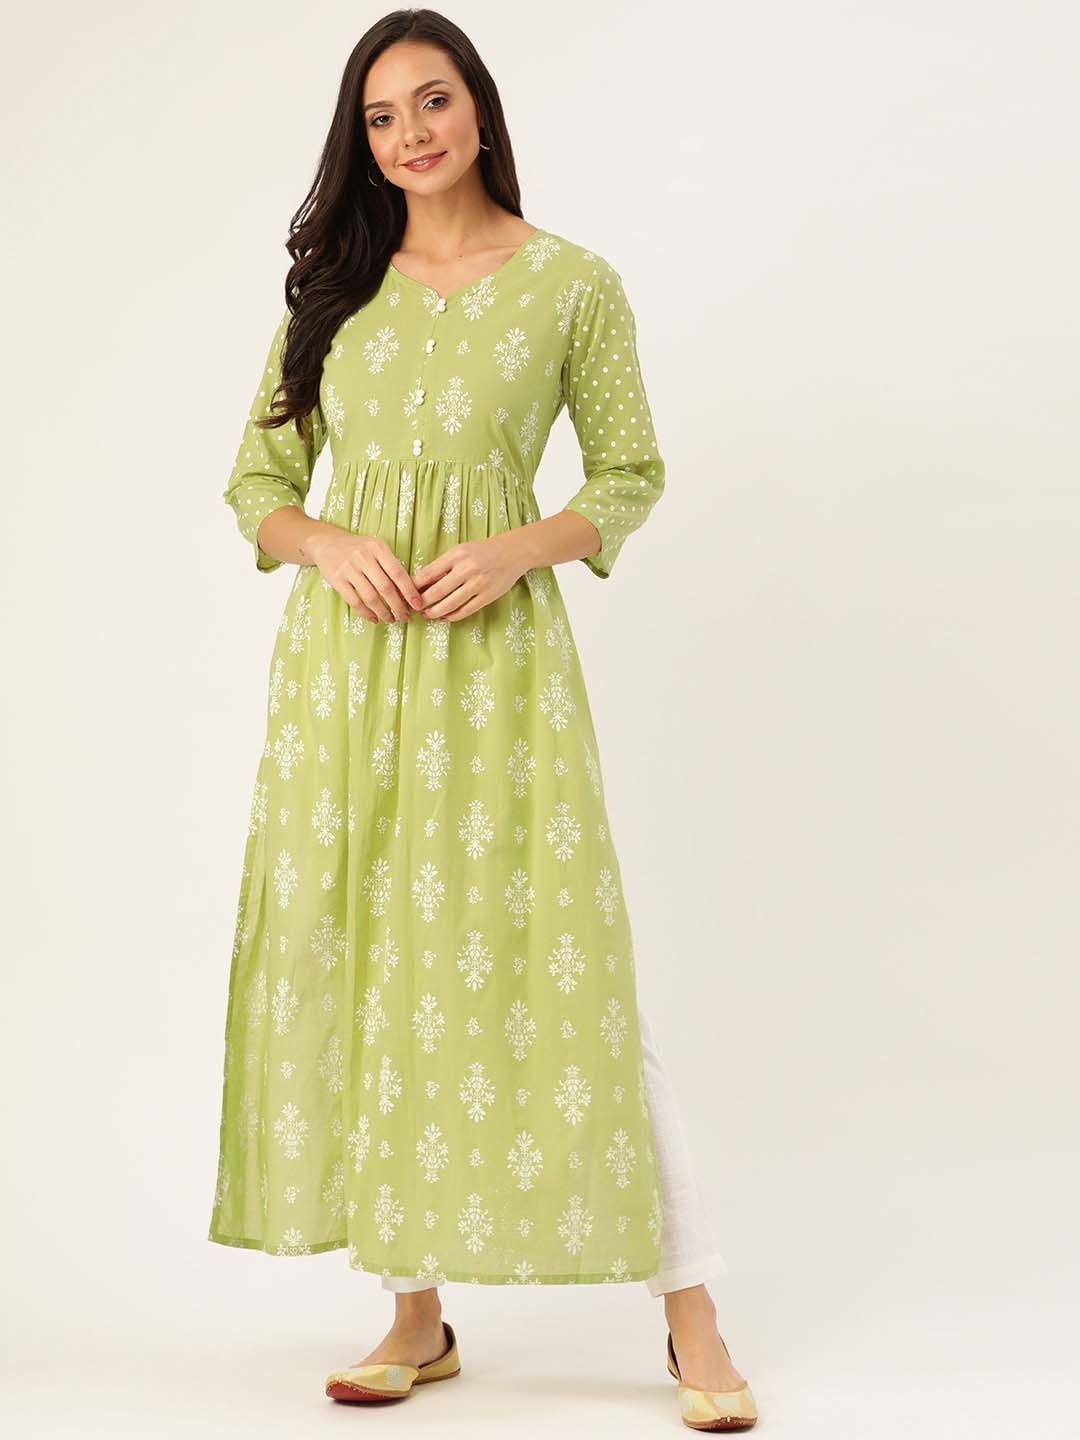 How To Look Slim In A Kurti